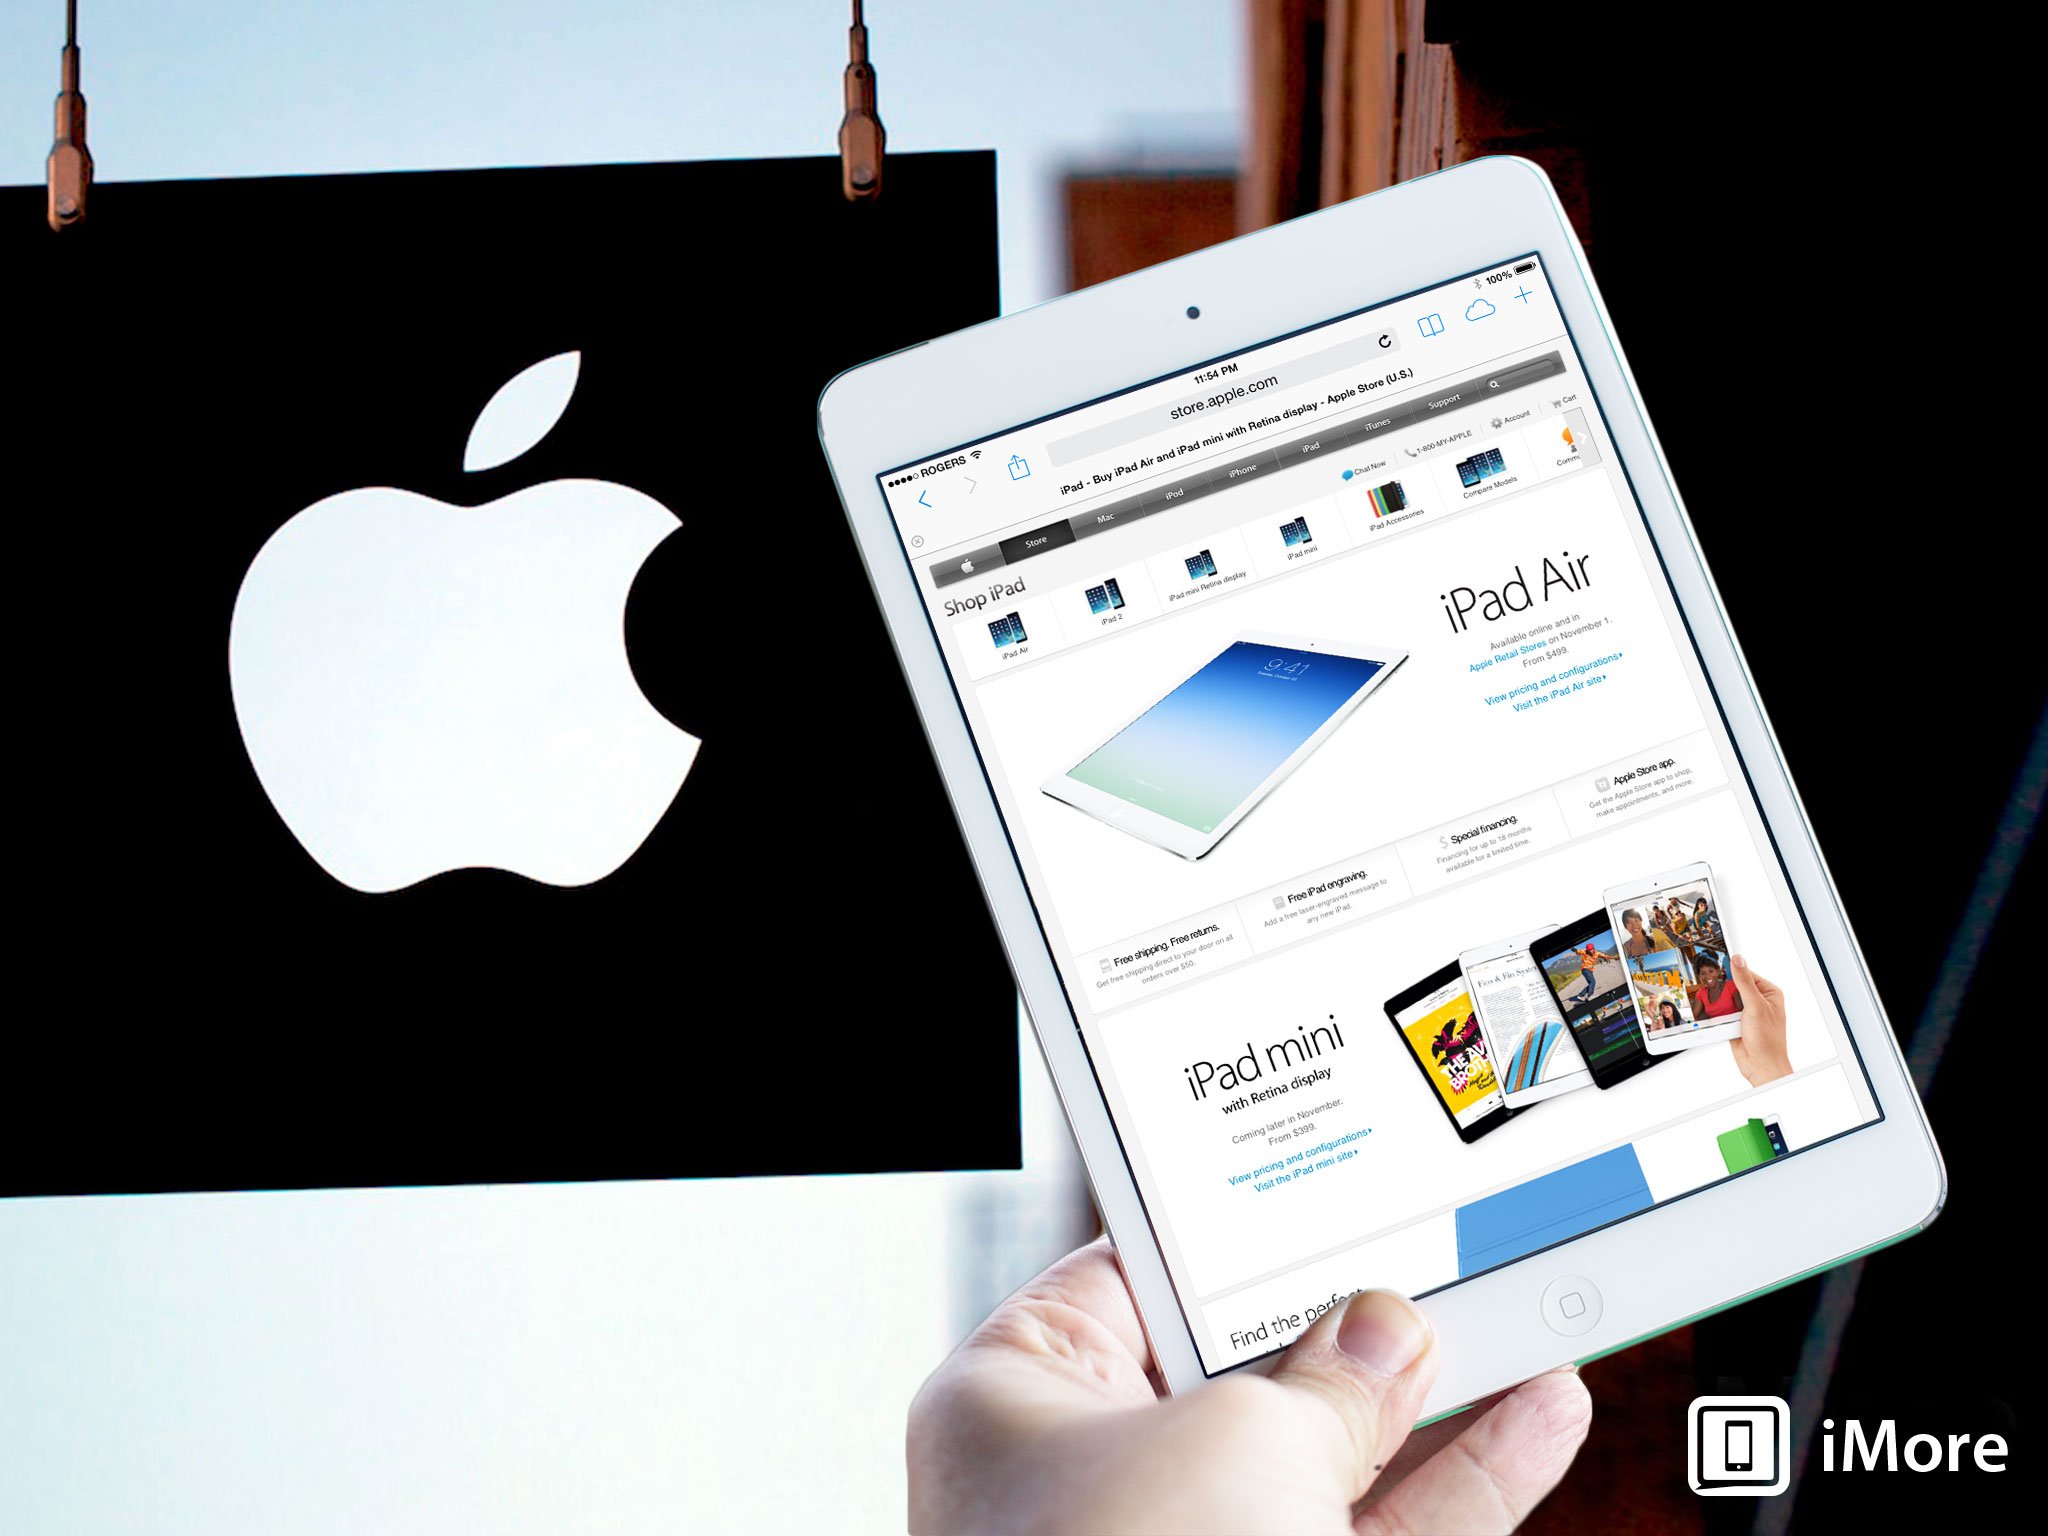 Industry analyst disputes bad info about iPad marketshare